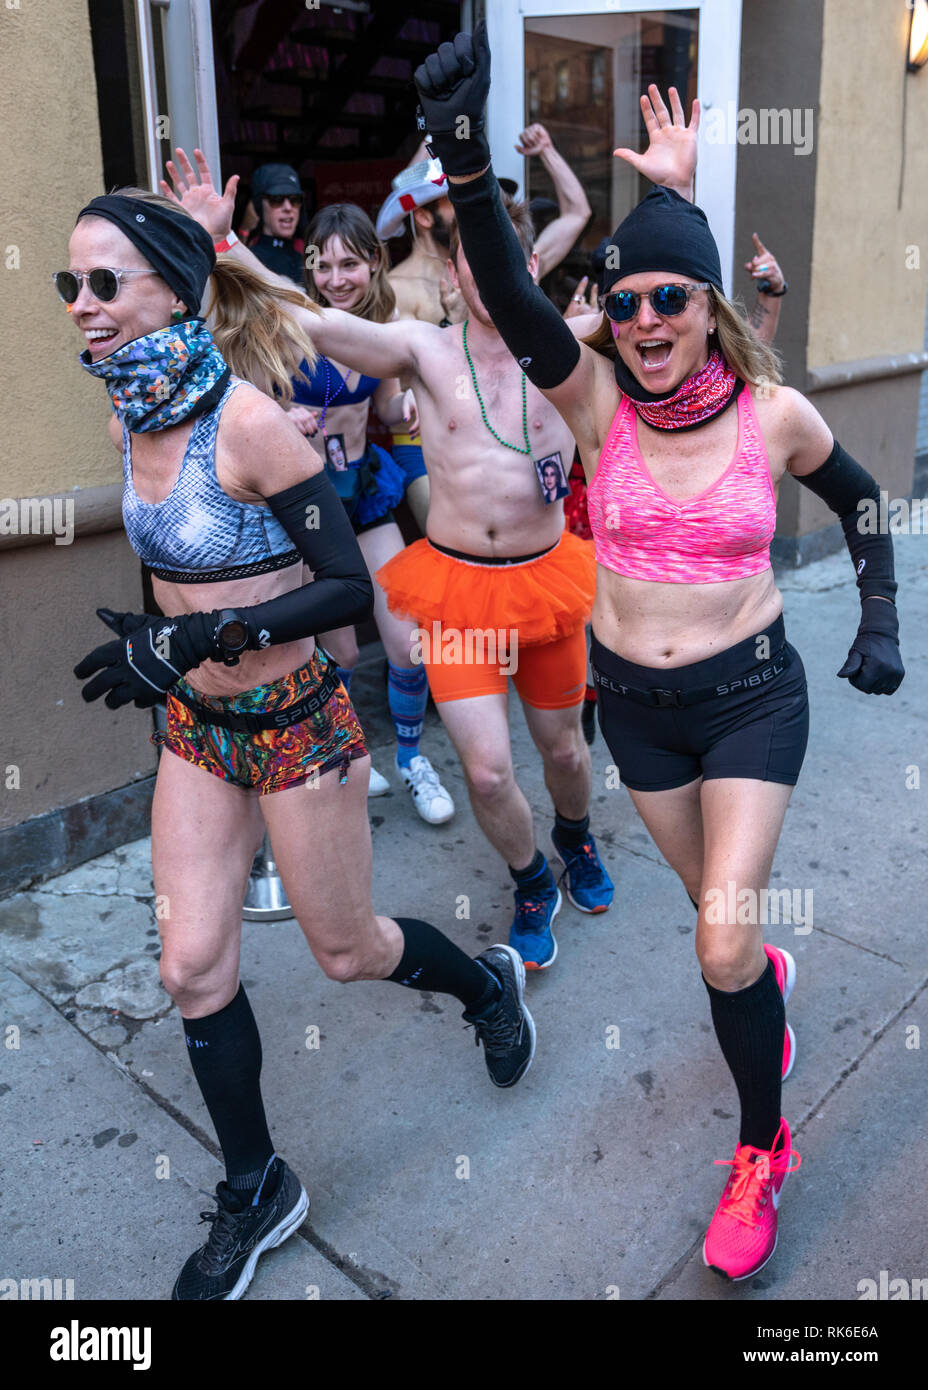 New York, USA. 9 February 2019. Runners wearing little more than underwear  defy freezing temperatures to participate in Cupid's Undie Run in New York  City. The annual charity event raises funds to